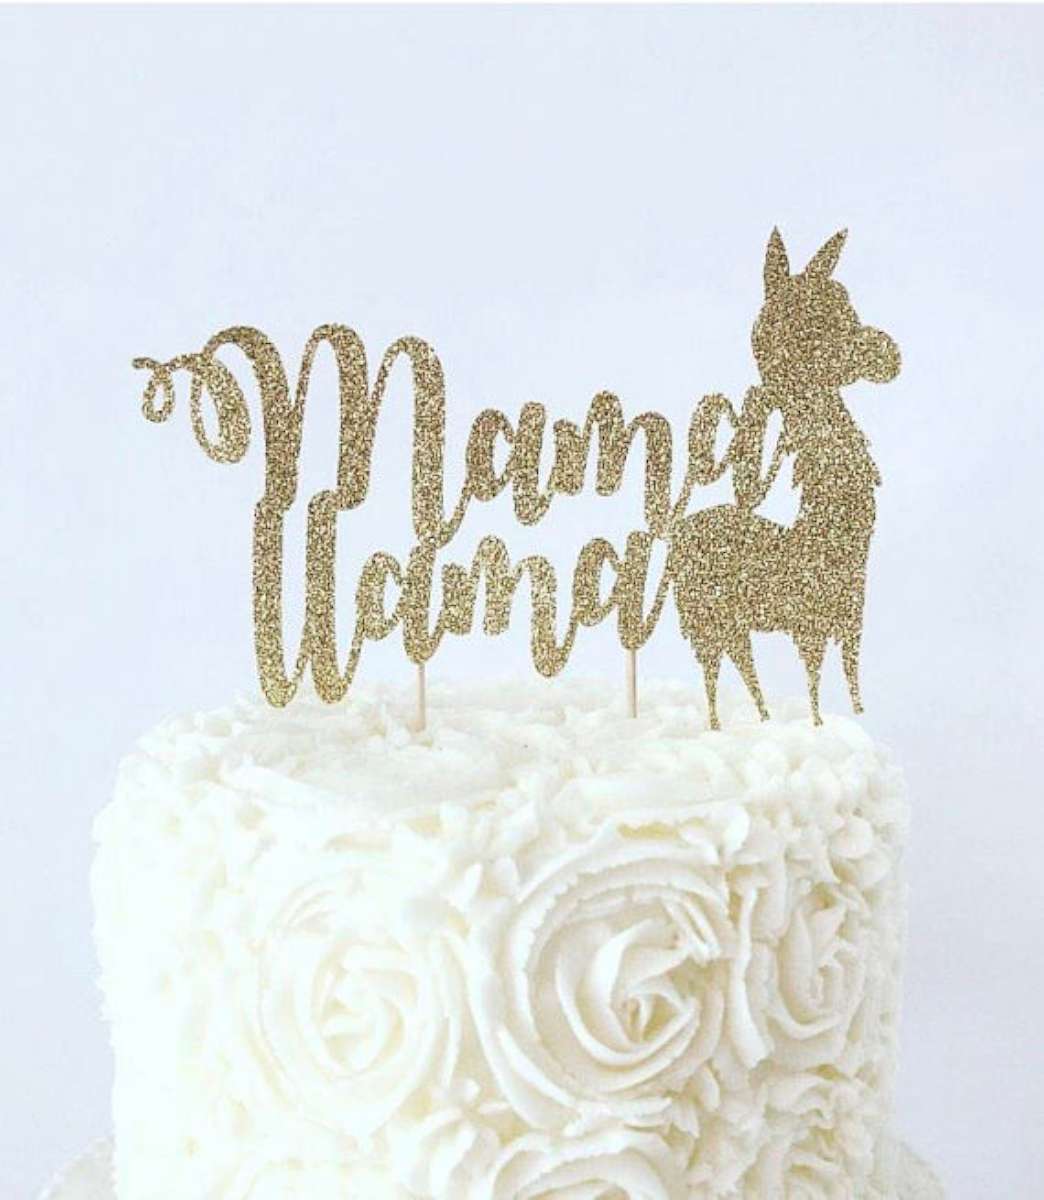 PHOTO: This llama cake topper is listed on Etsy.com and sold by the shop, BellsNBerries.